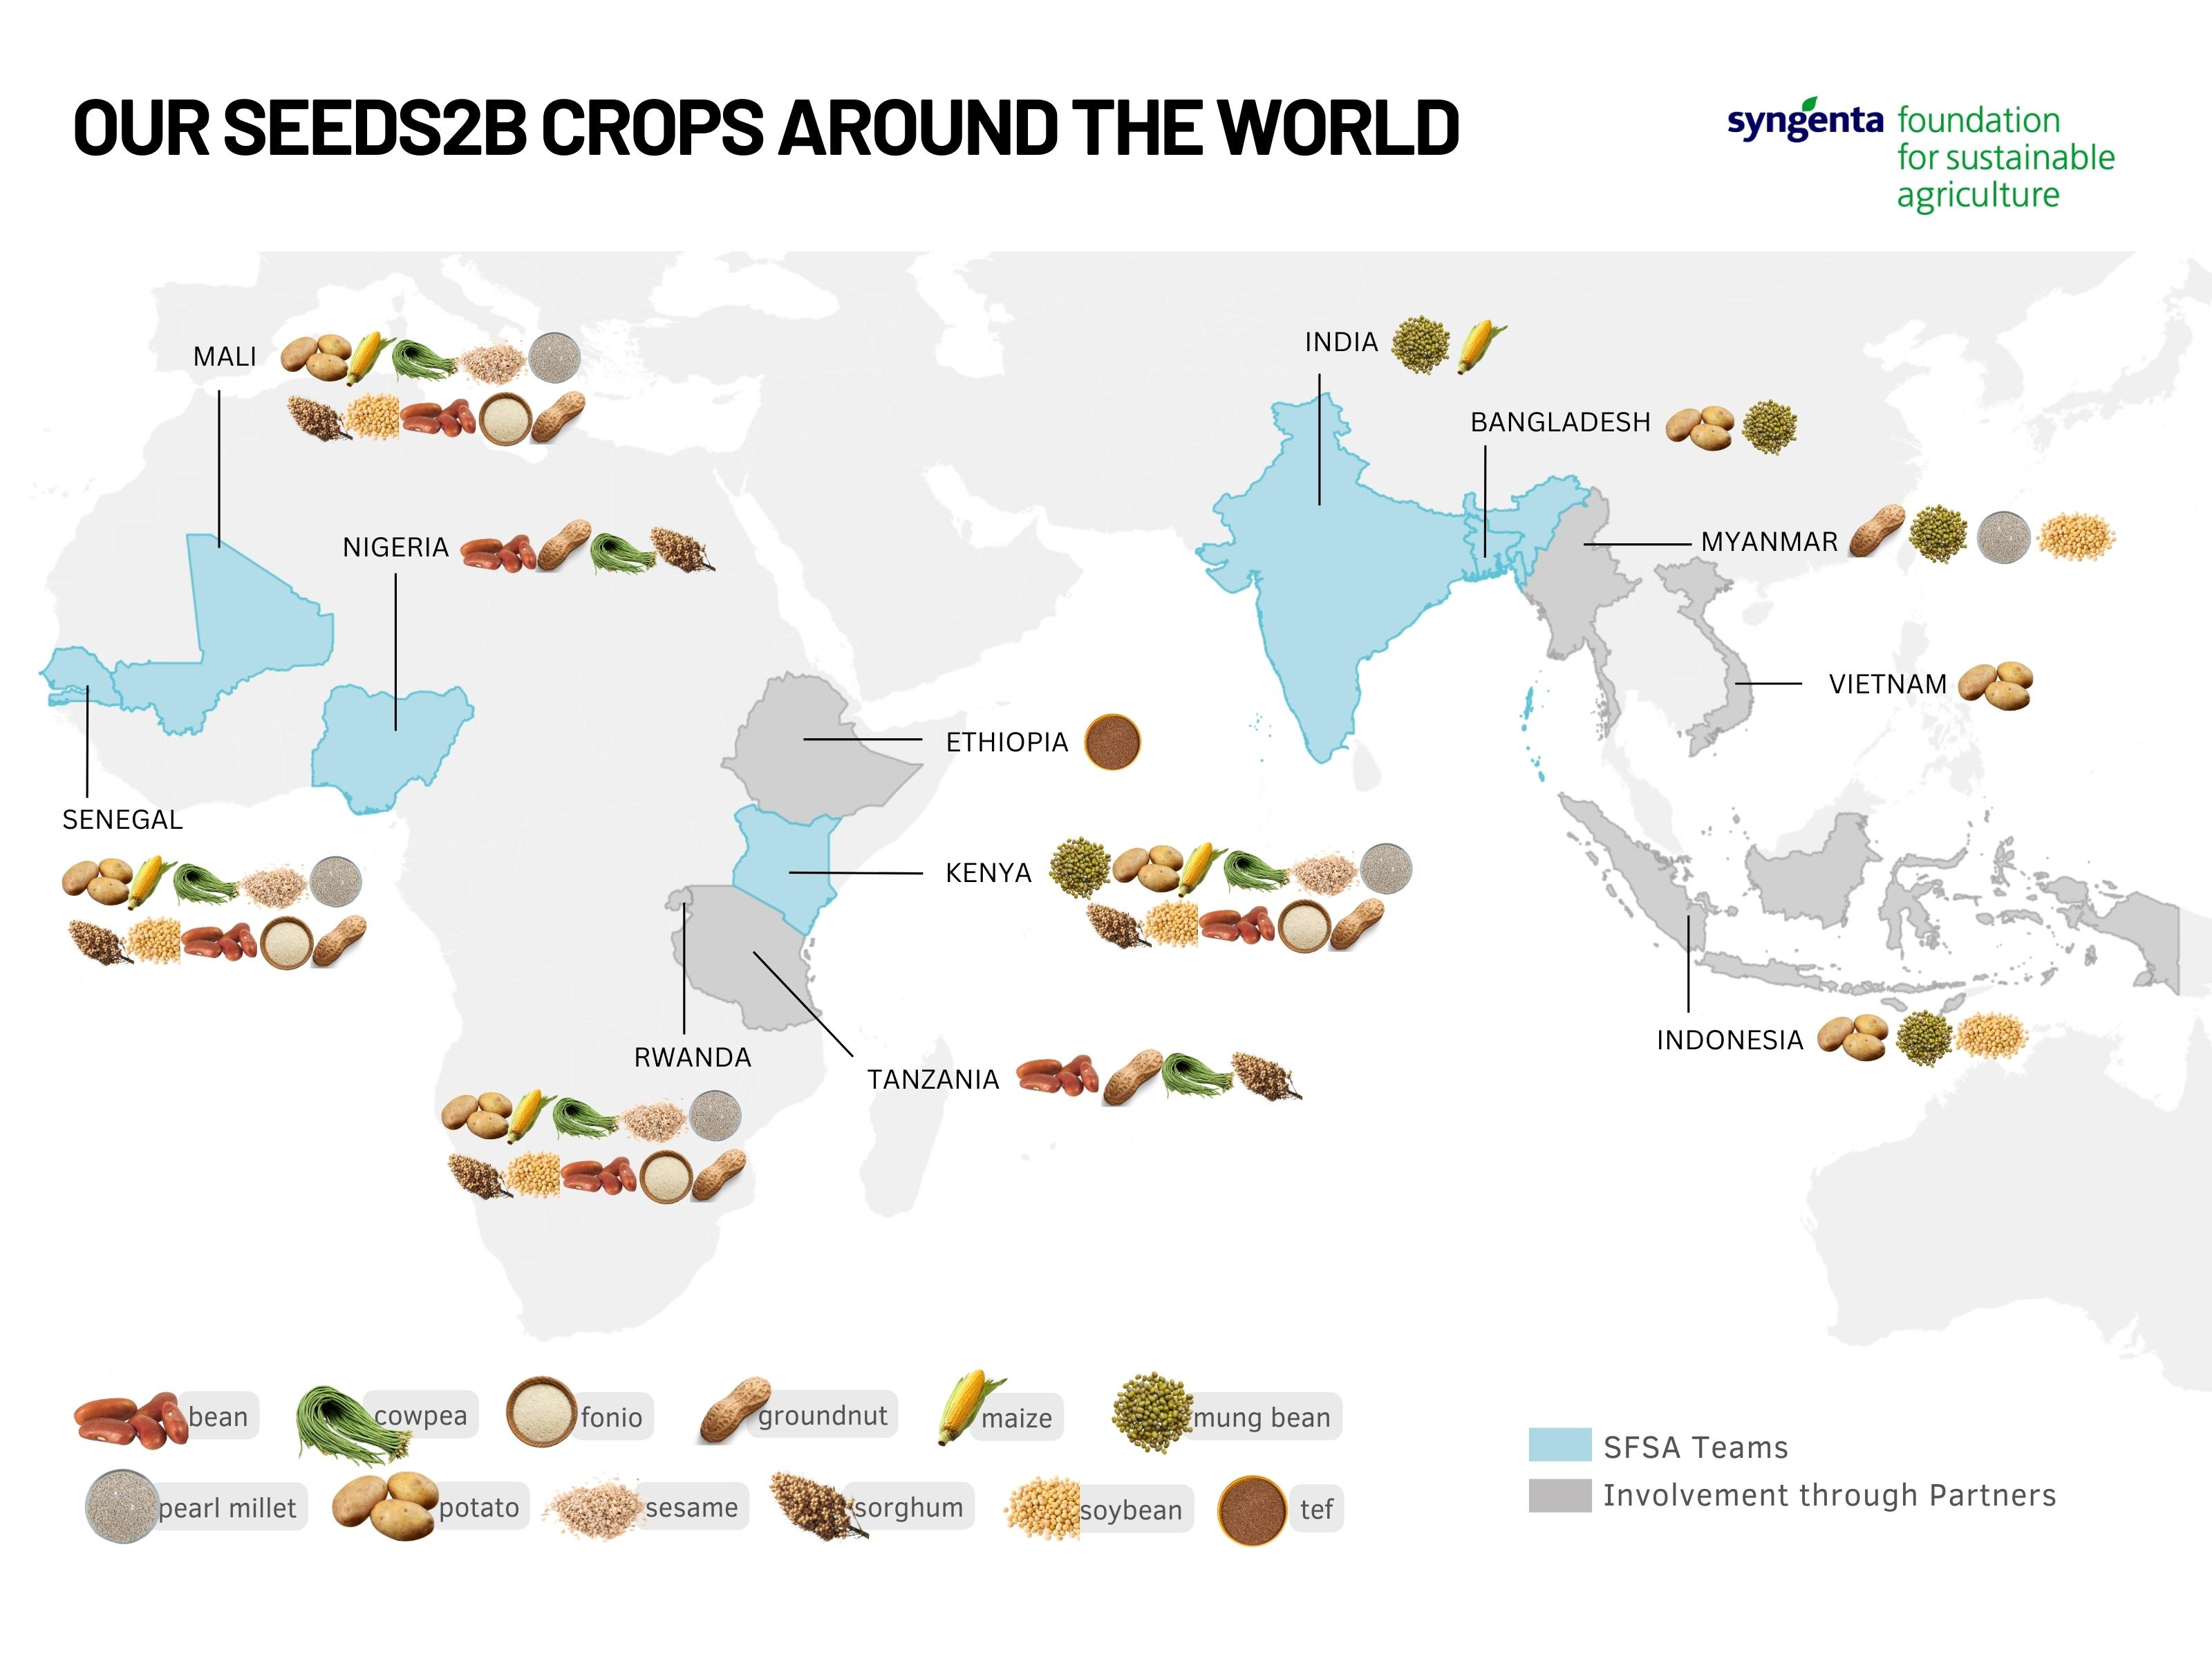 Our crops around the world